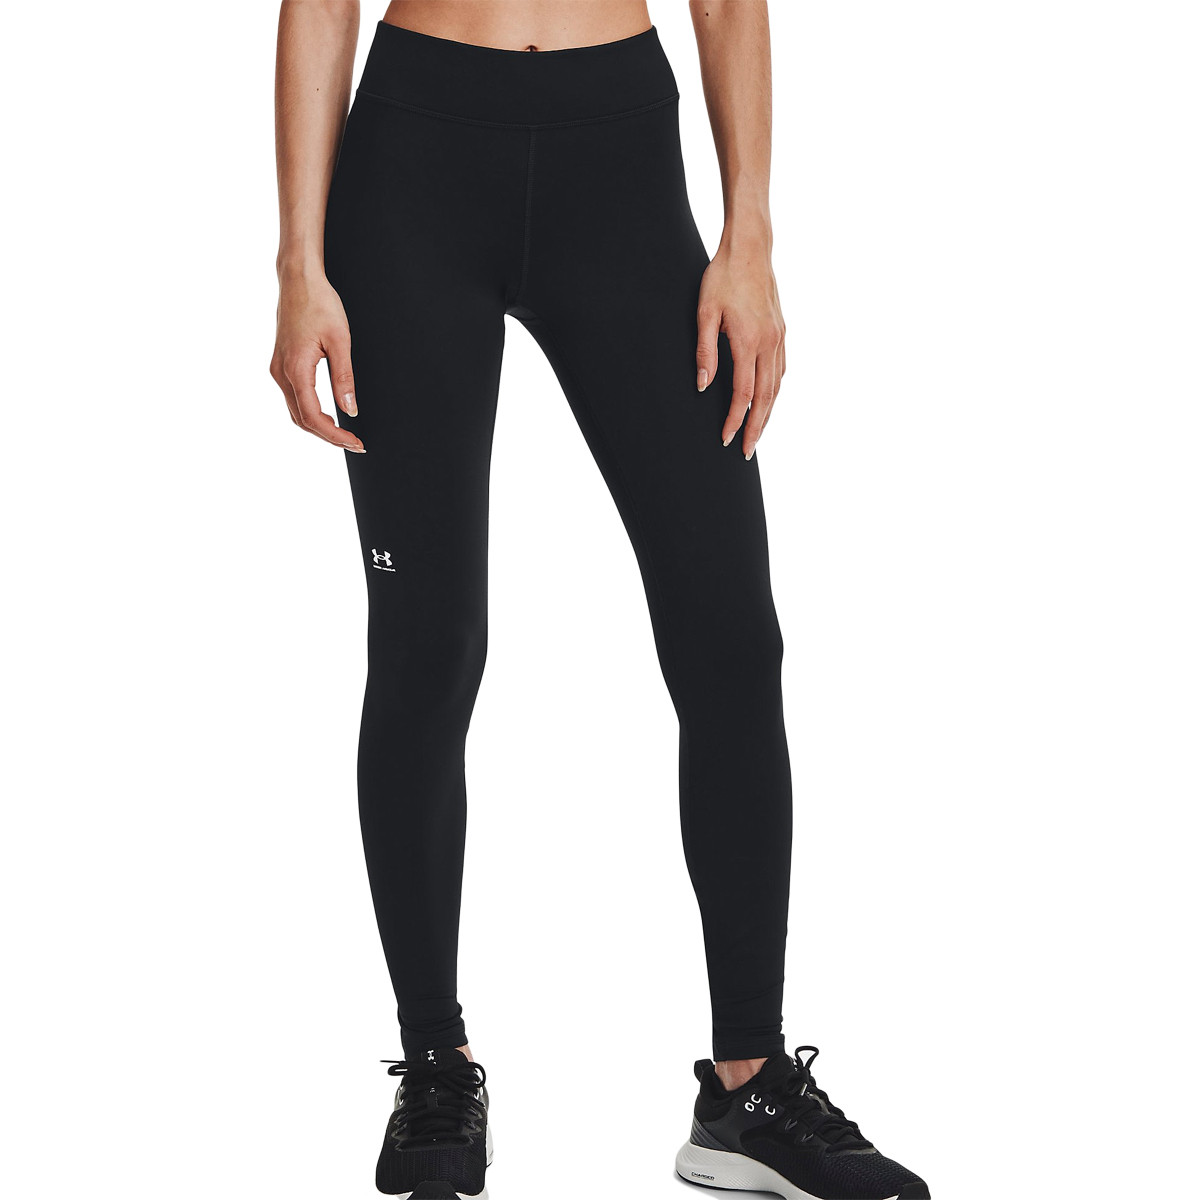 MALLAS UNDER ARMOUR MUJER CG AUTHENTICS - UNDER ARMOUR - Mujer